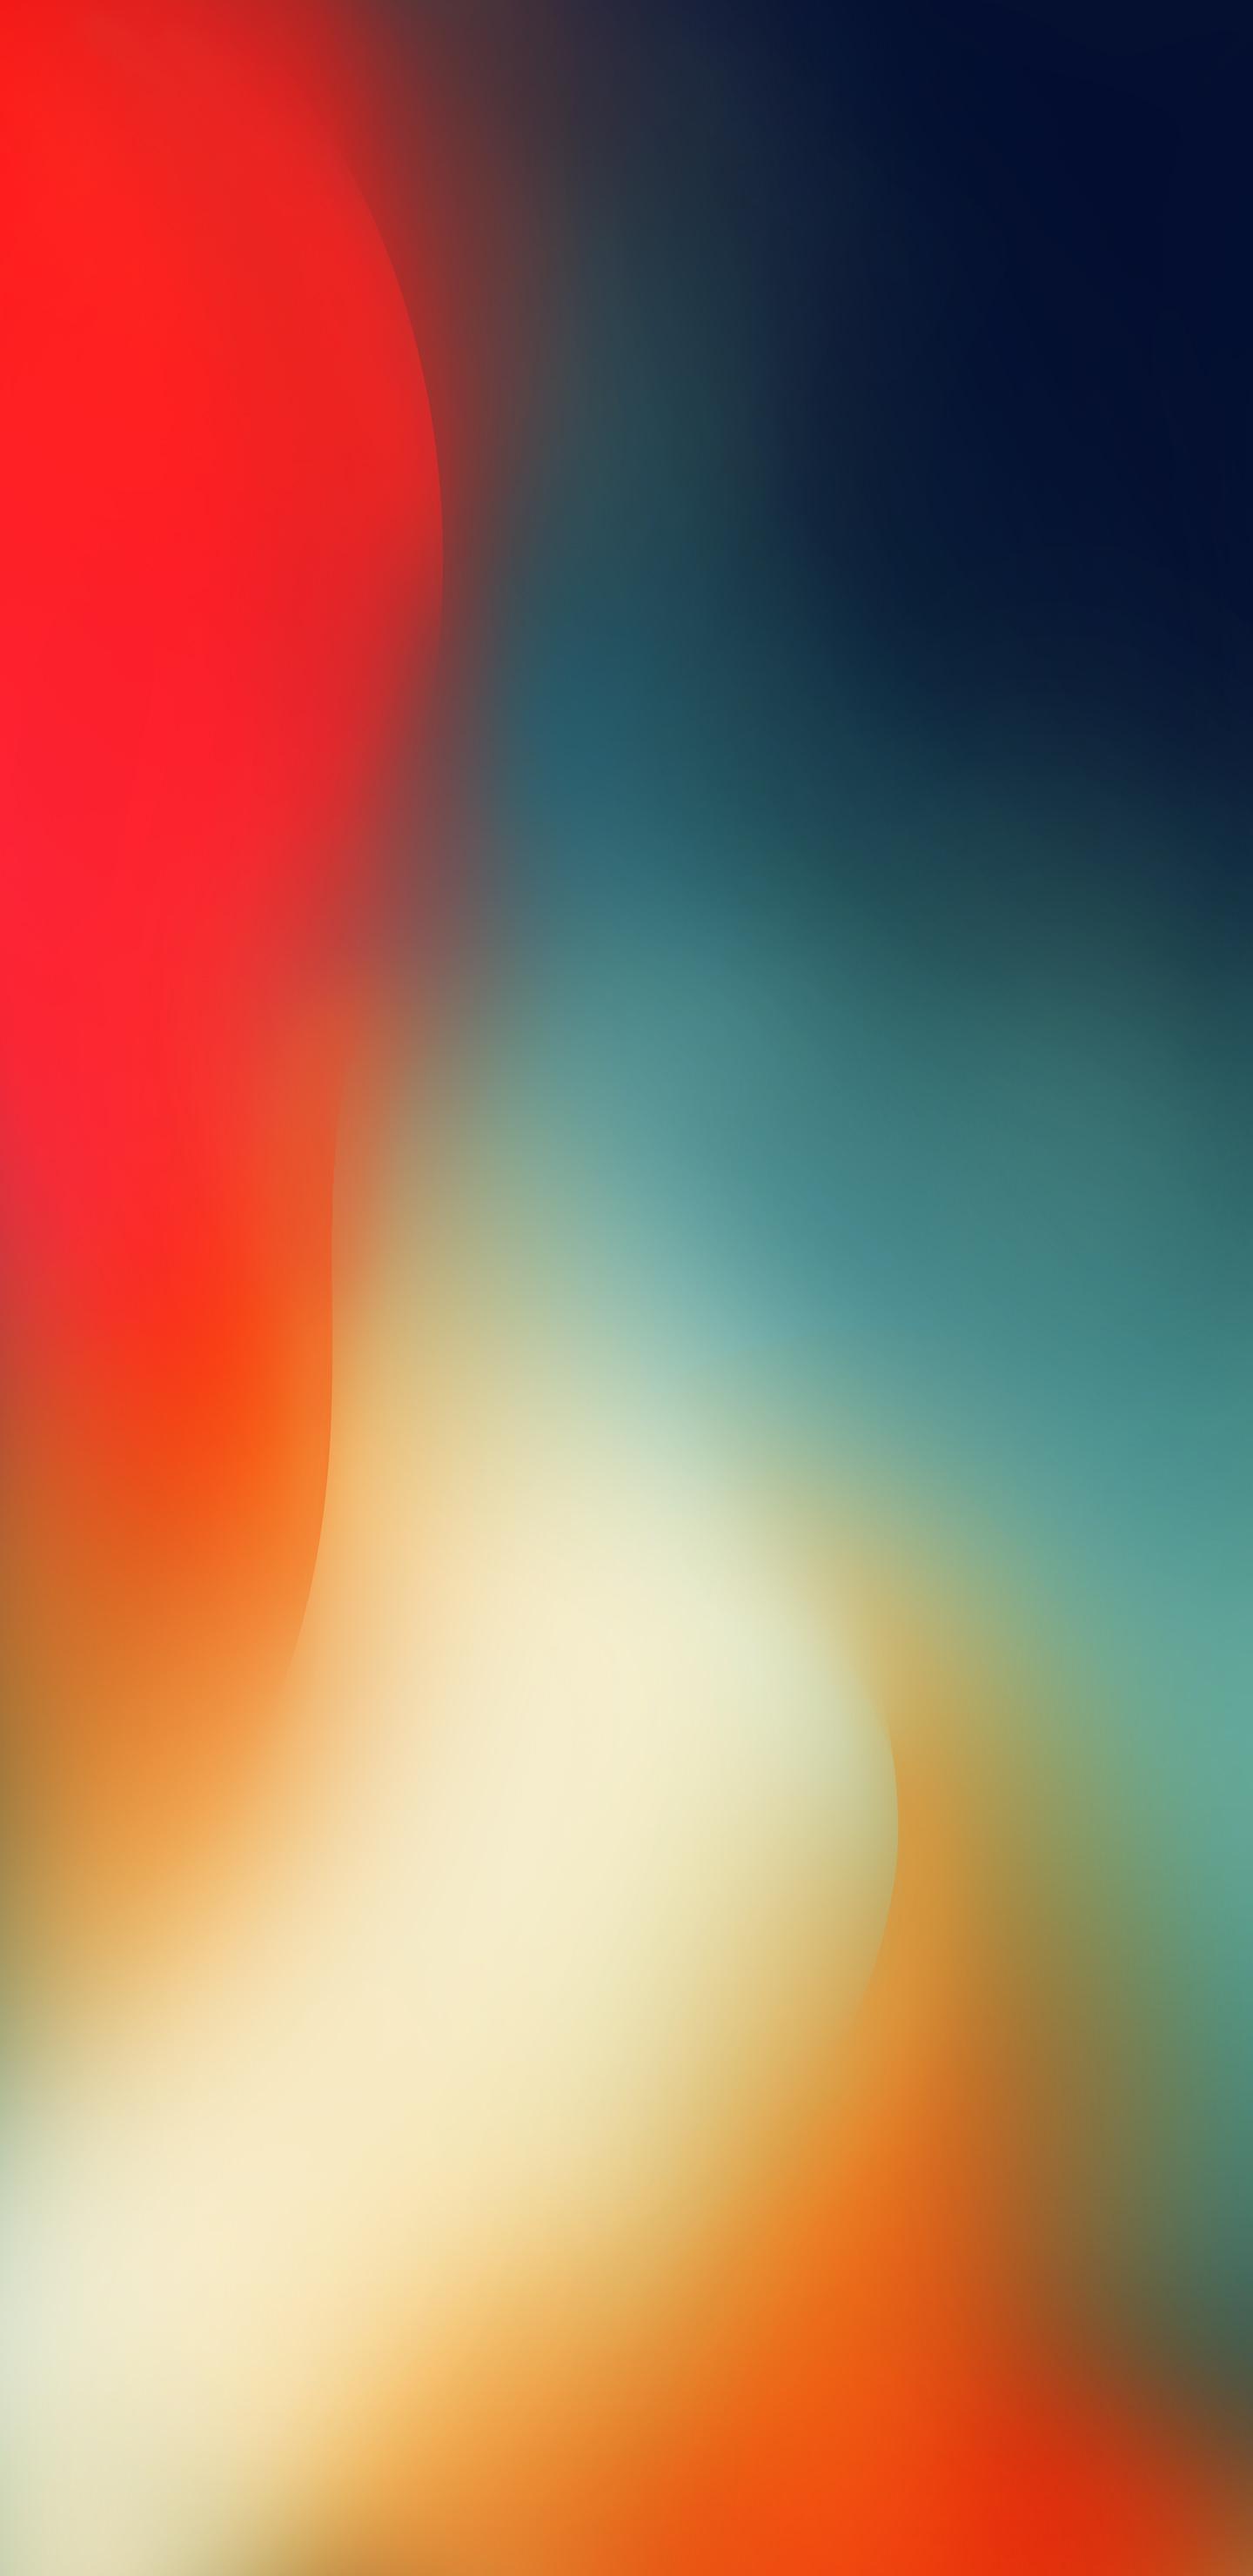 Simple iPhone X Wallpaper You Should Download (Ep.2)